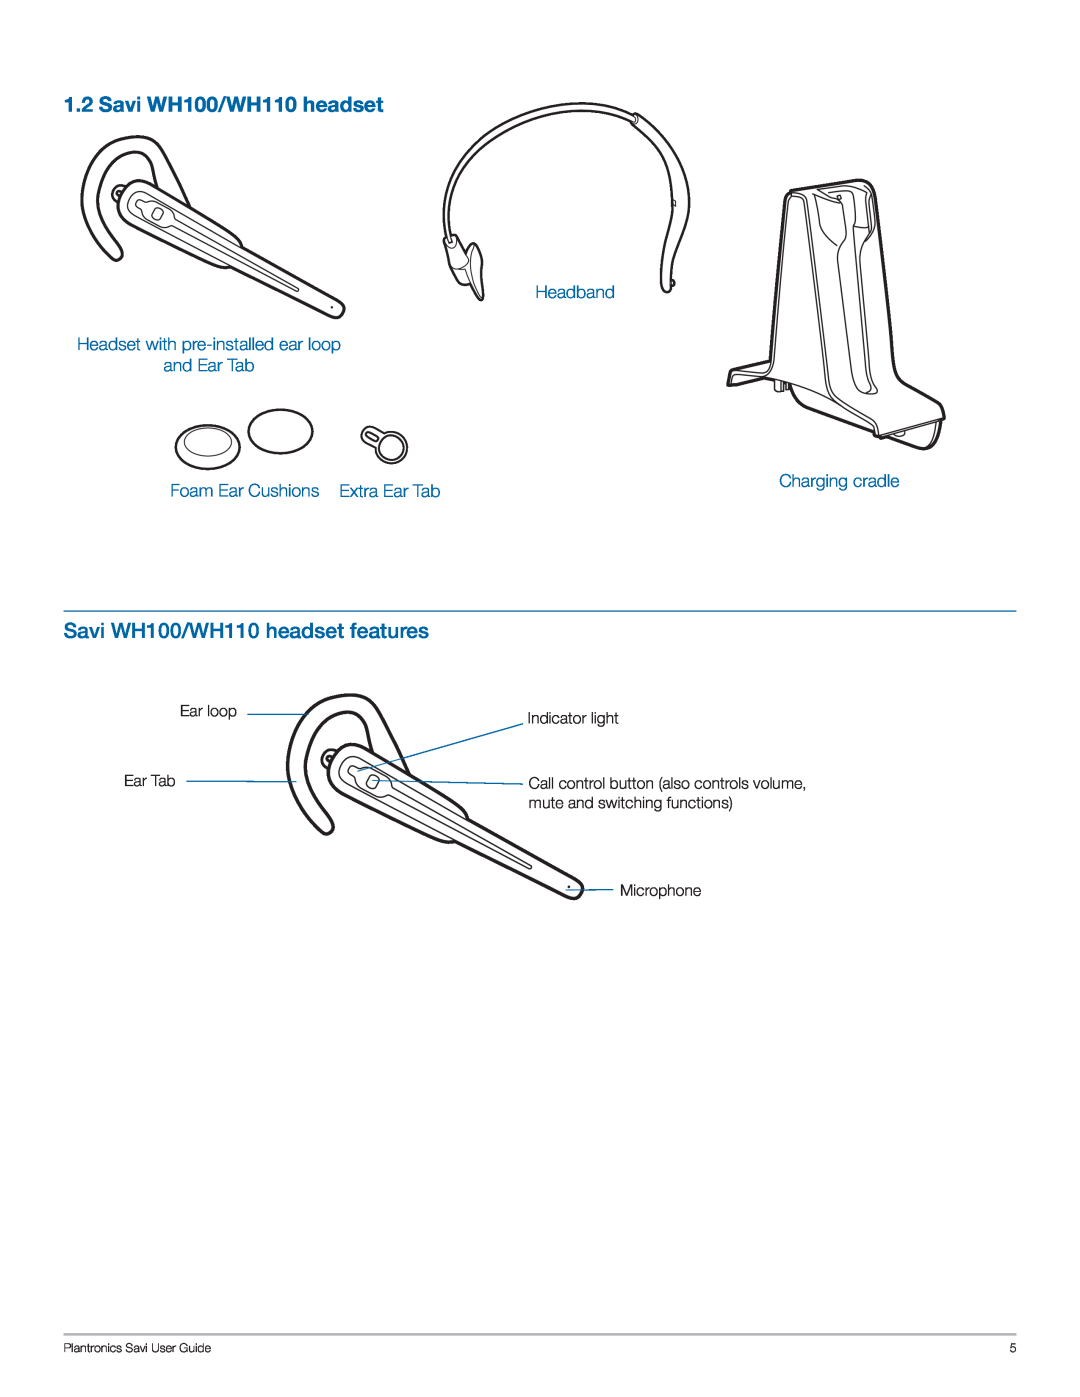 Plantronics WO100 manual Savi WH100/WH110 headset features, Headband Headset with pre-installed ear loop and Ear Tab 